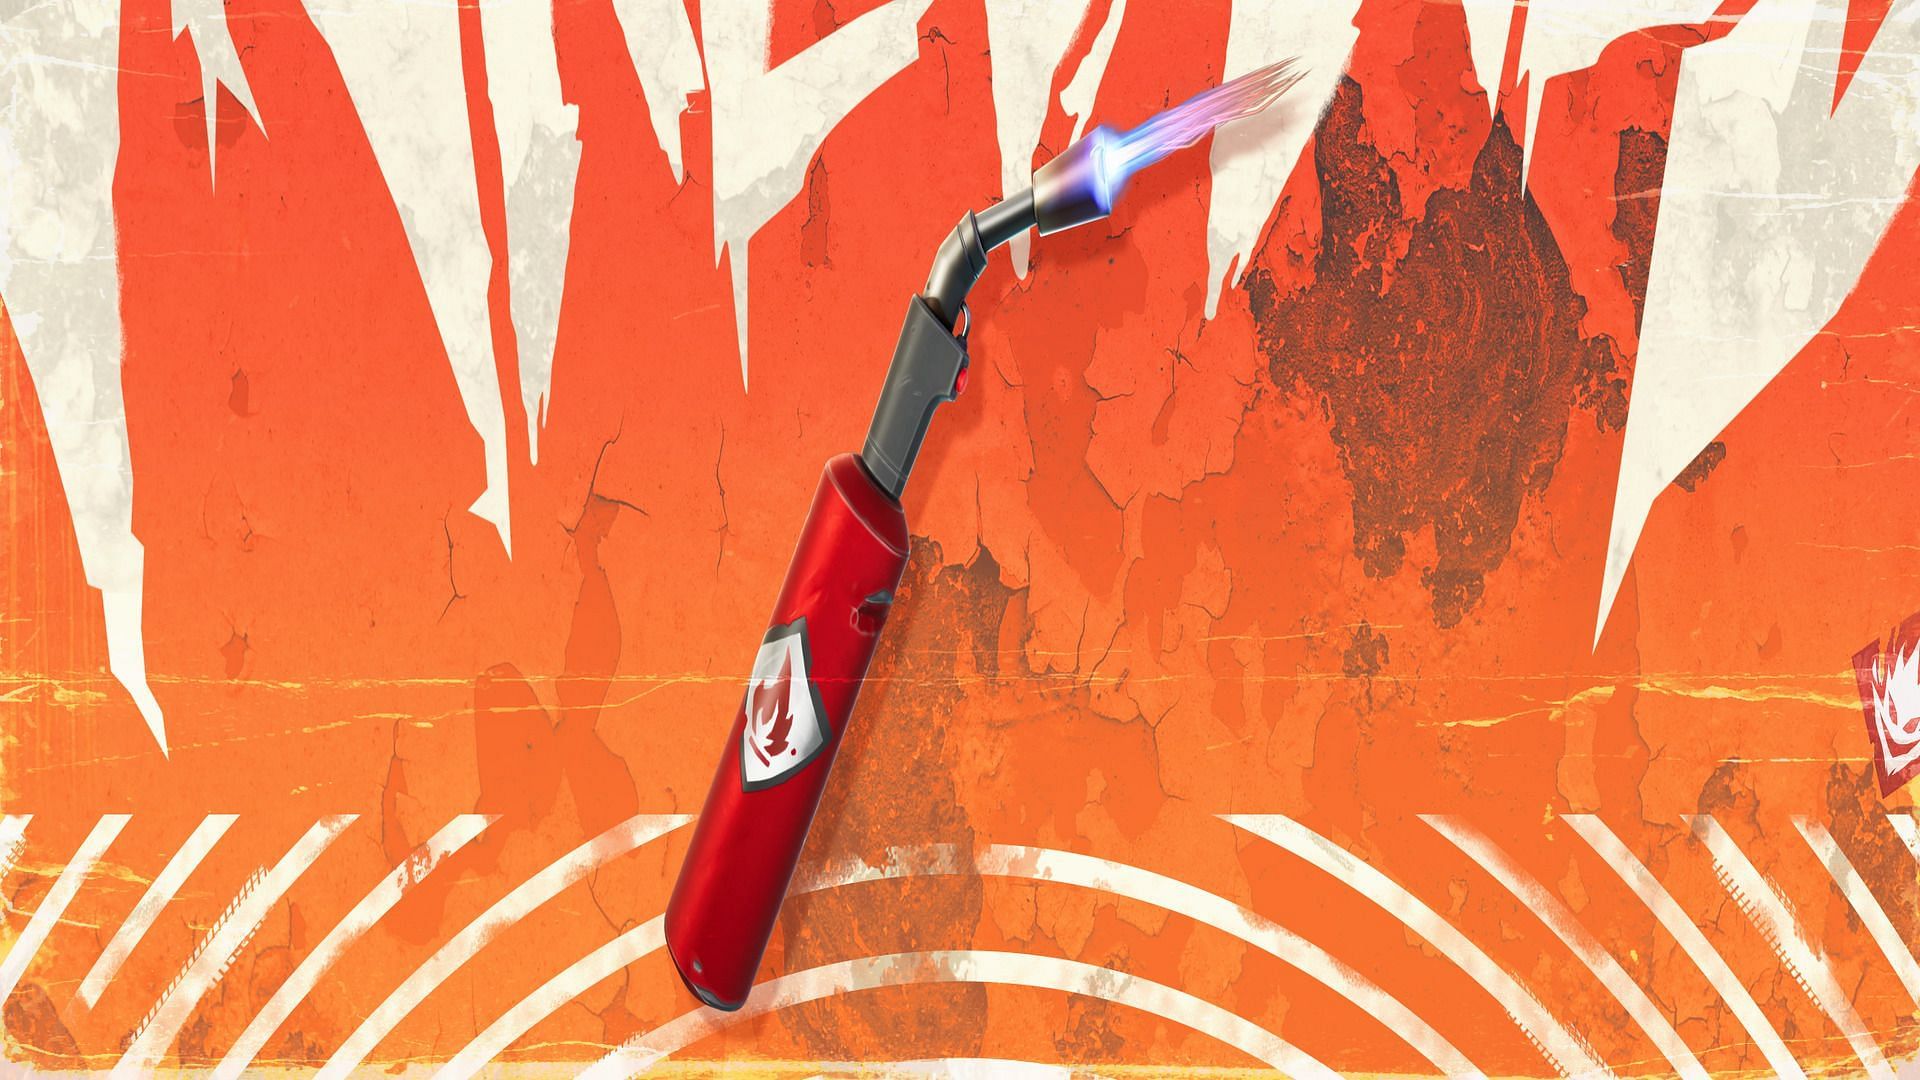 The handy repair torch comes to your aid in fixing your damaged vehicles (Image via Epic Games/ Fortnite)